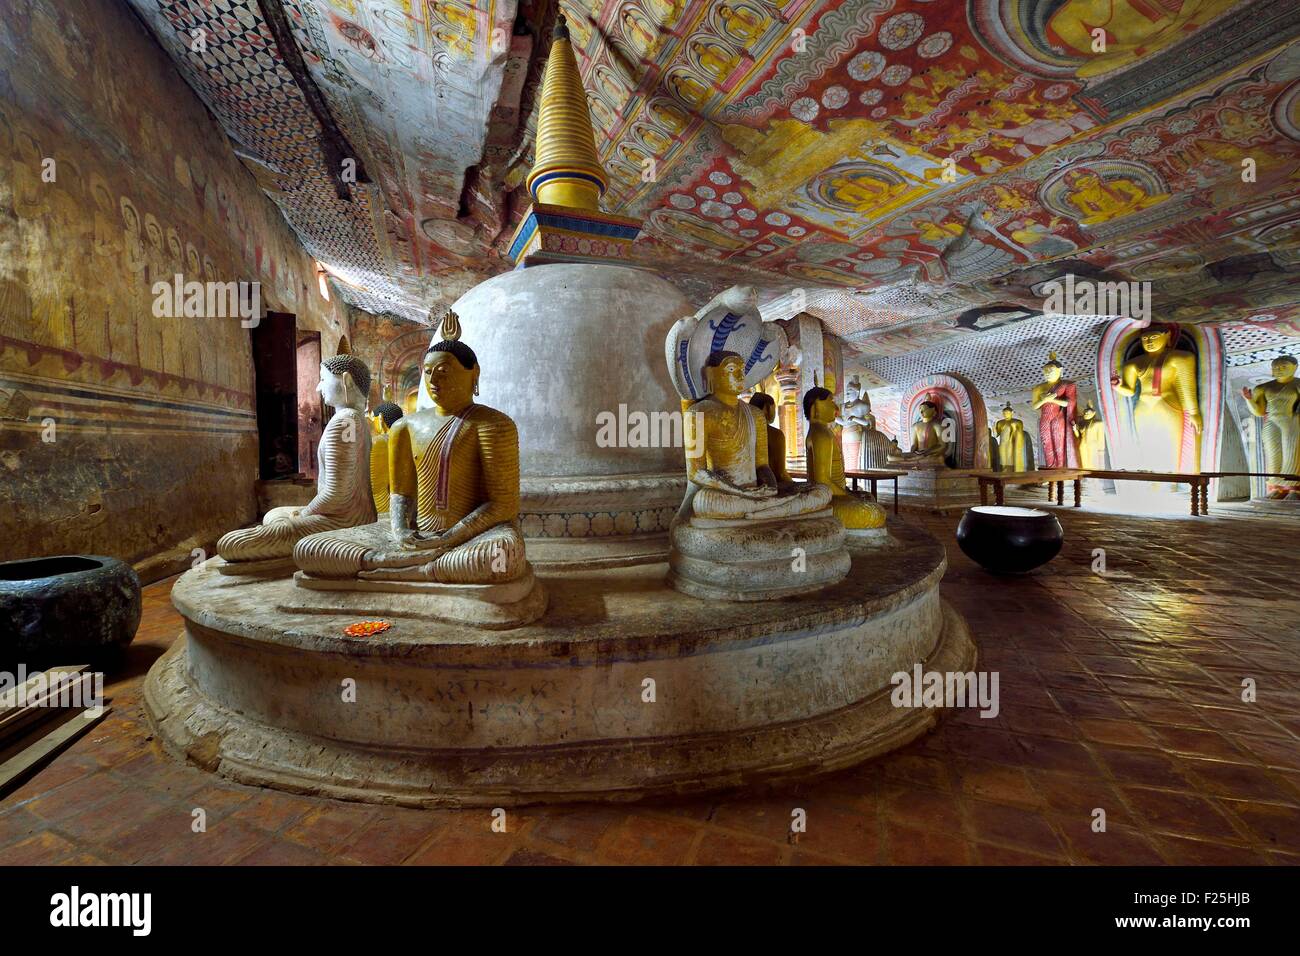 Sri Lanka, Central Province, Matale District, Dambulla, Royal Rock Temple also called Ran Giri (Golden Rock) listed as World Heritage by UNESCO, Cave 2 Maharaja Viharaya is the largest Stock Photo